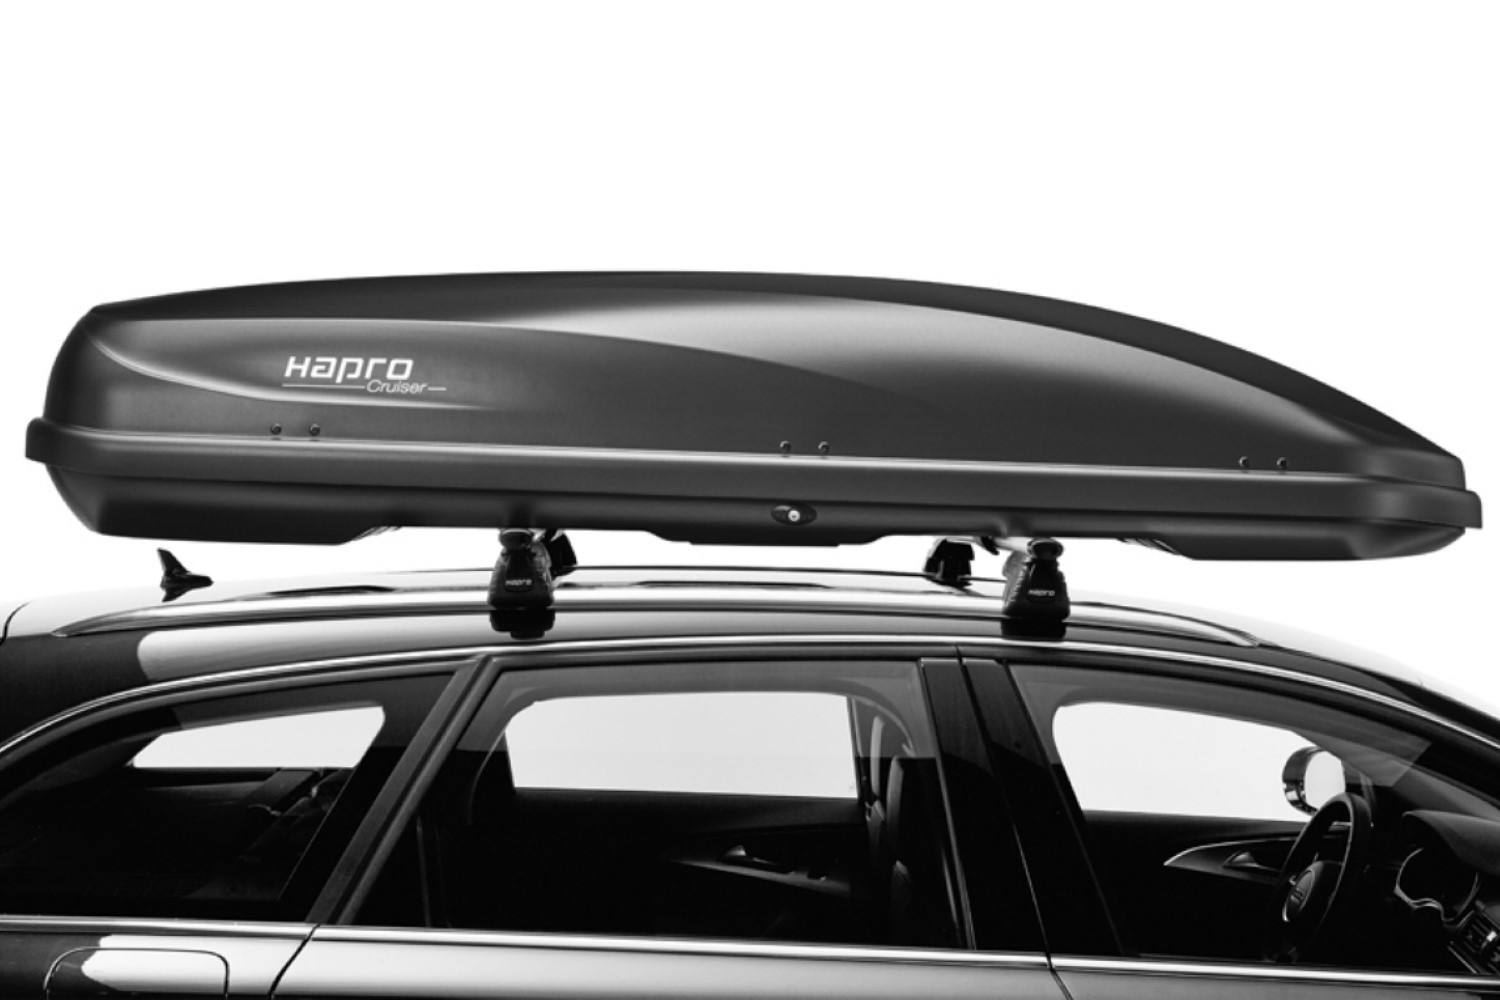 Roof box Hapro Cruiser 10.8 Anthracite with Car-Bags.com bag set (HAP30690-BB1) (5)